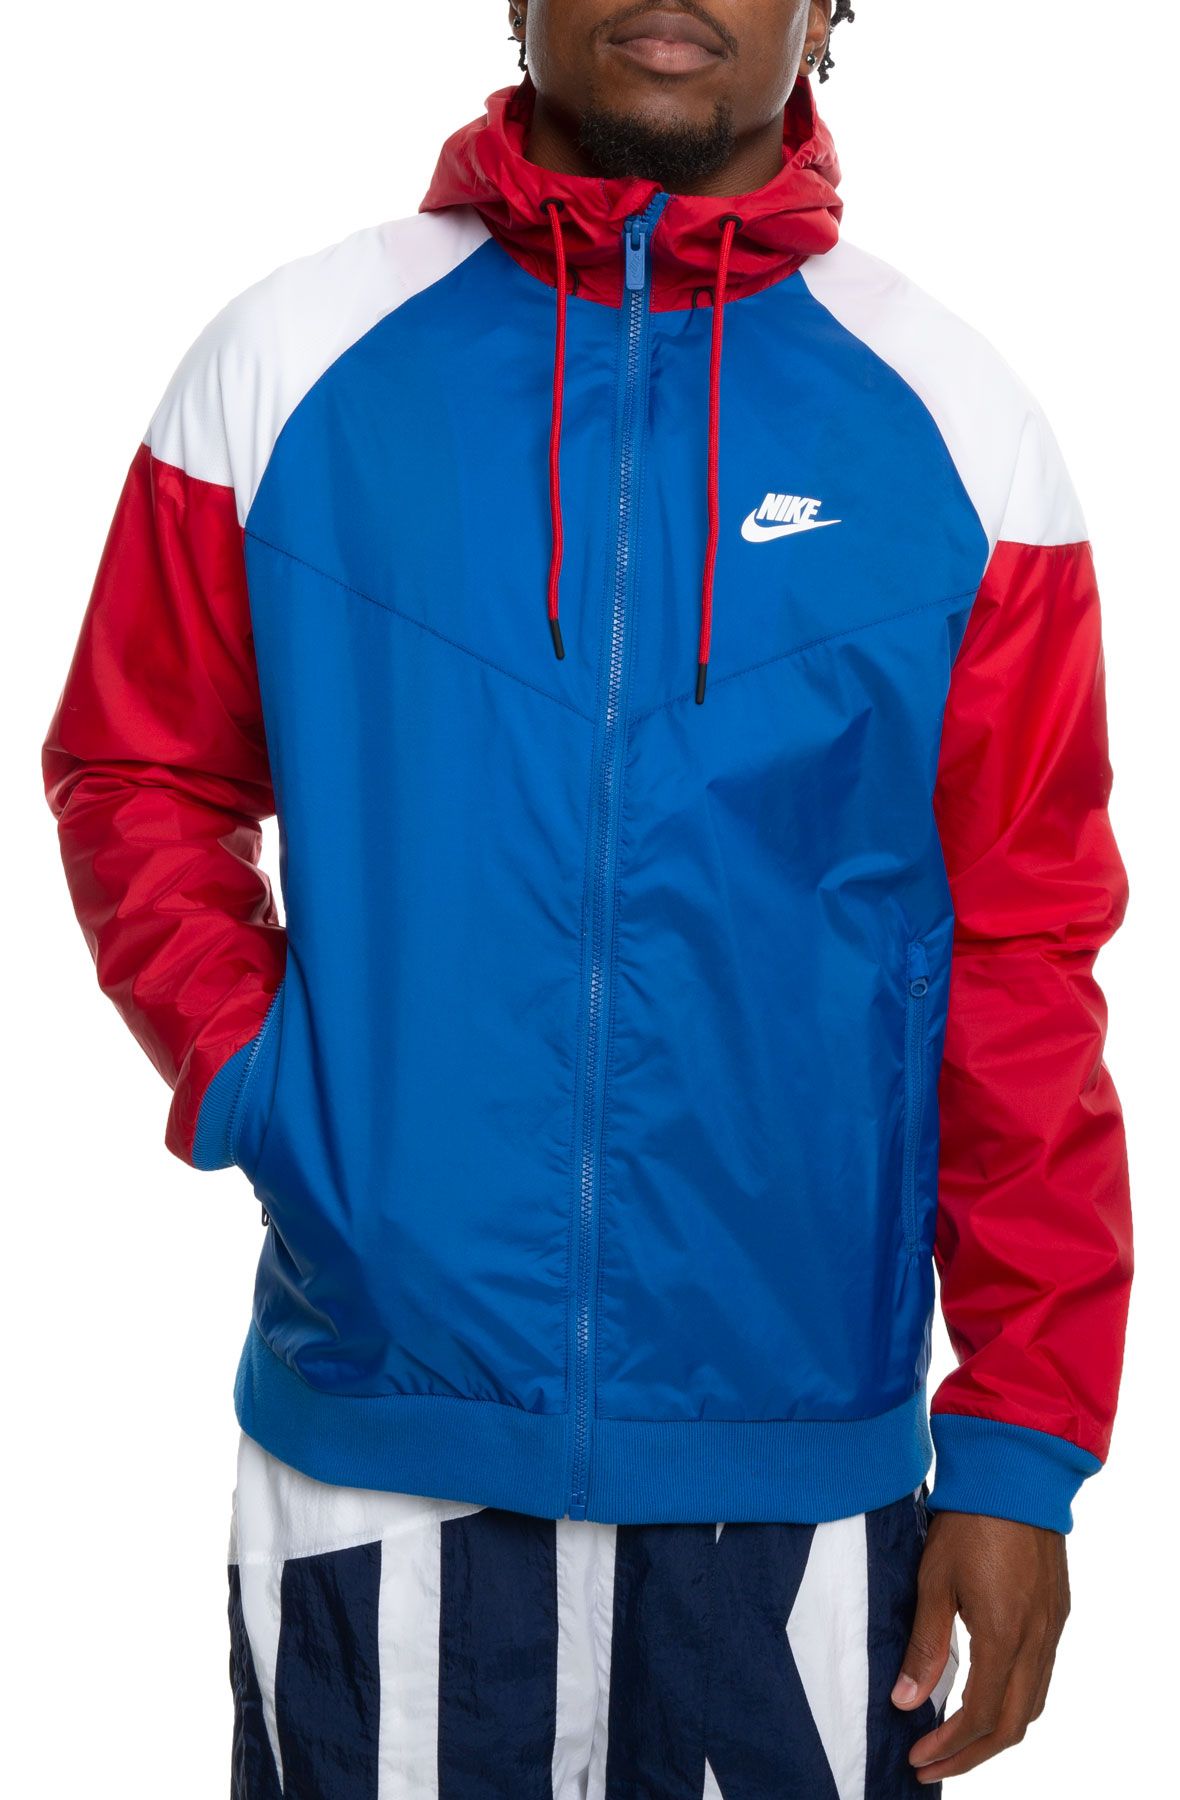 red white and blue nike apparel